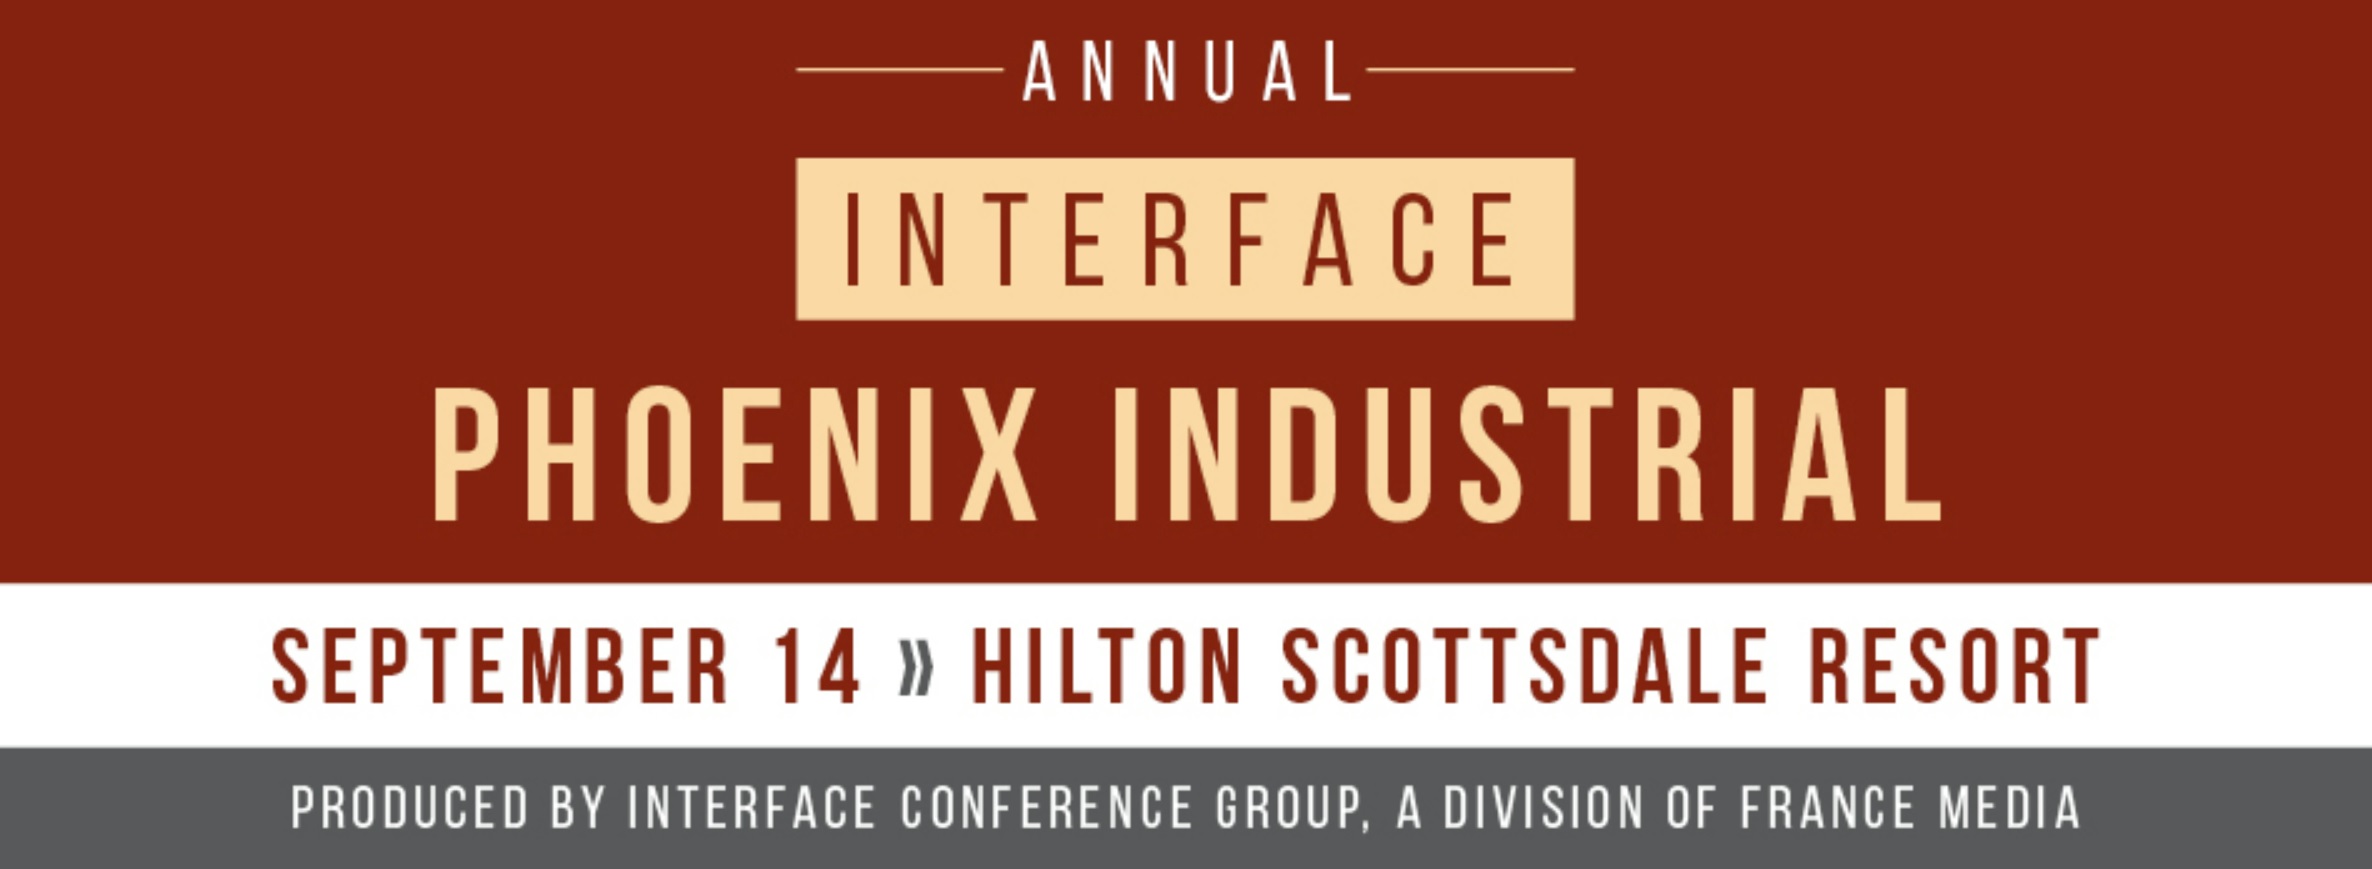 InterFace Phoenix Industrial Conference 2022